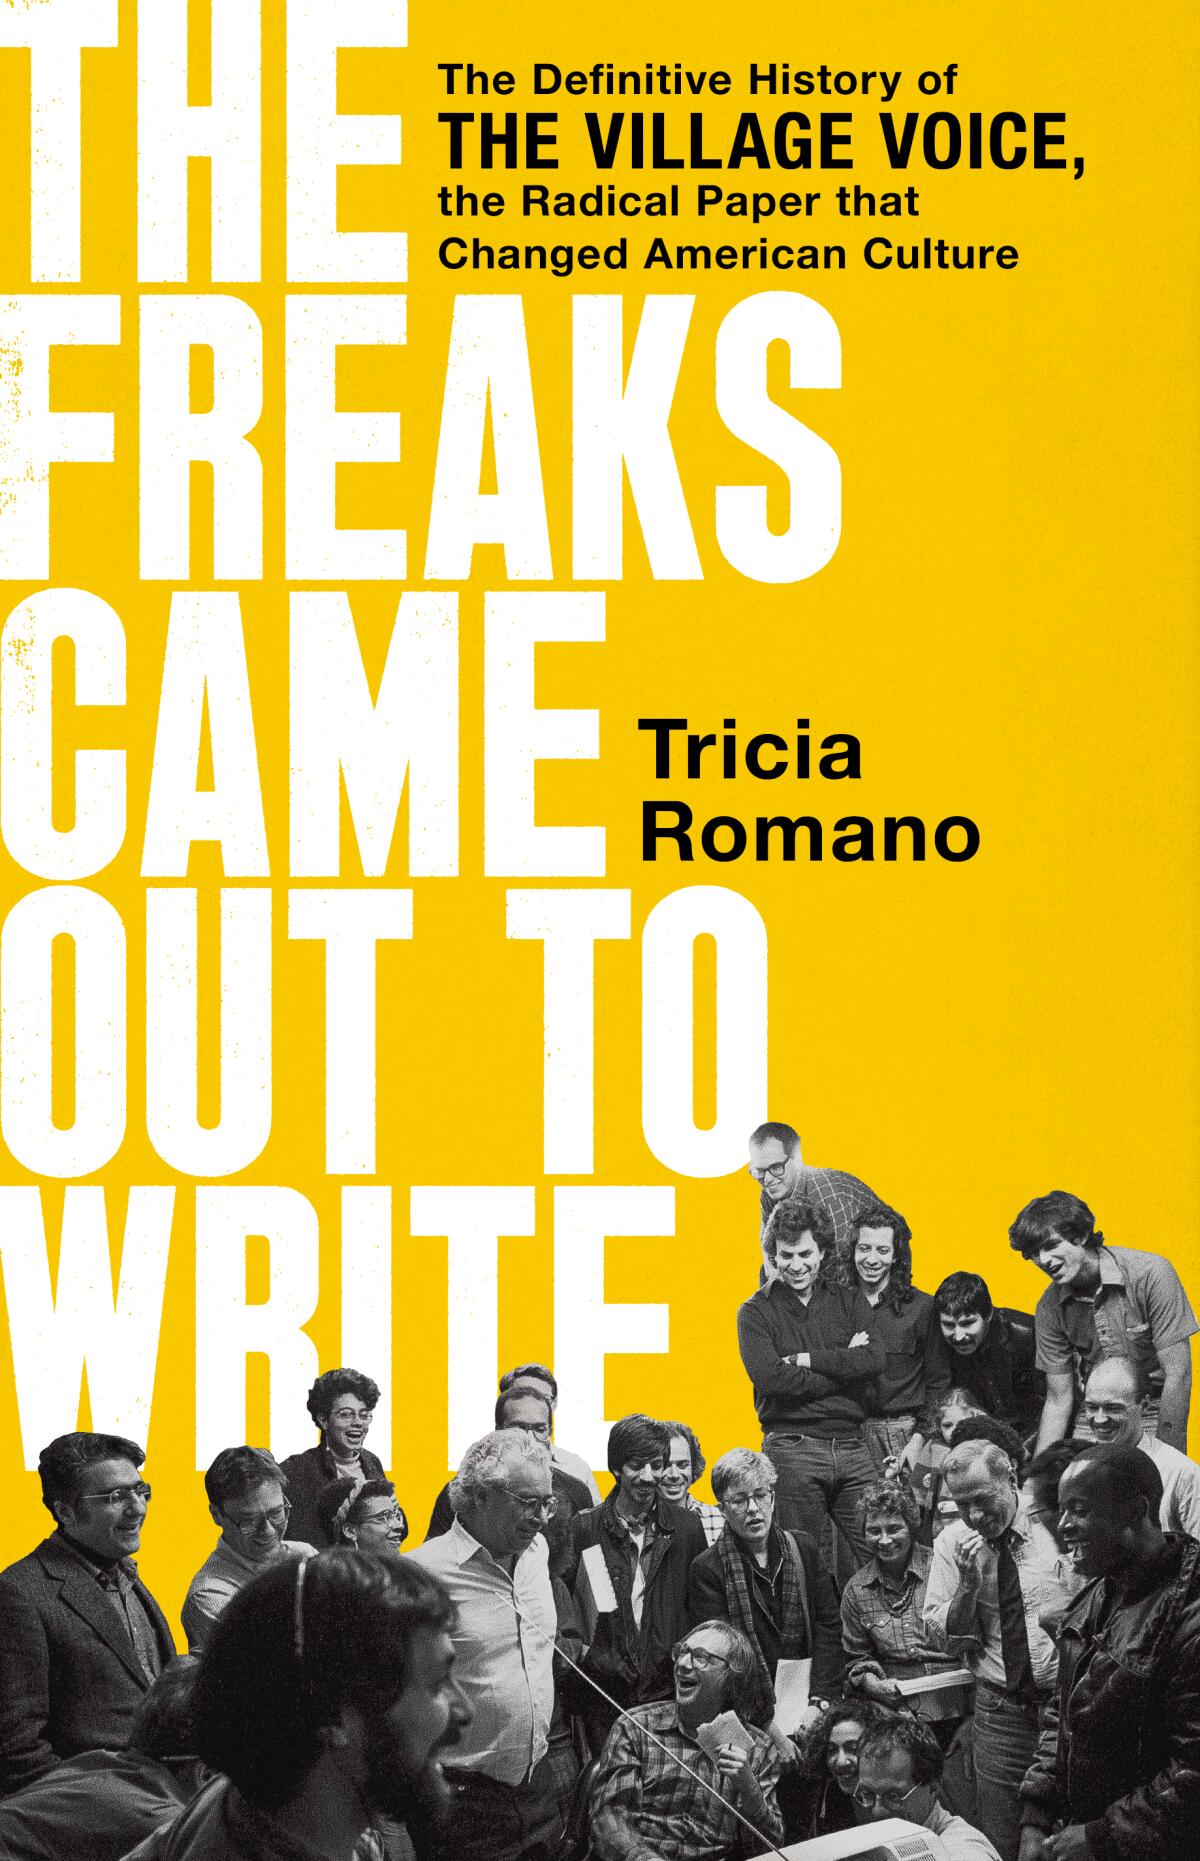 A bright yellow book cover features the all-caps title "THE FREAKS CAME OUT TO WRITE."